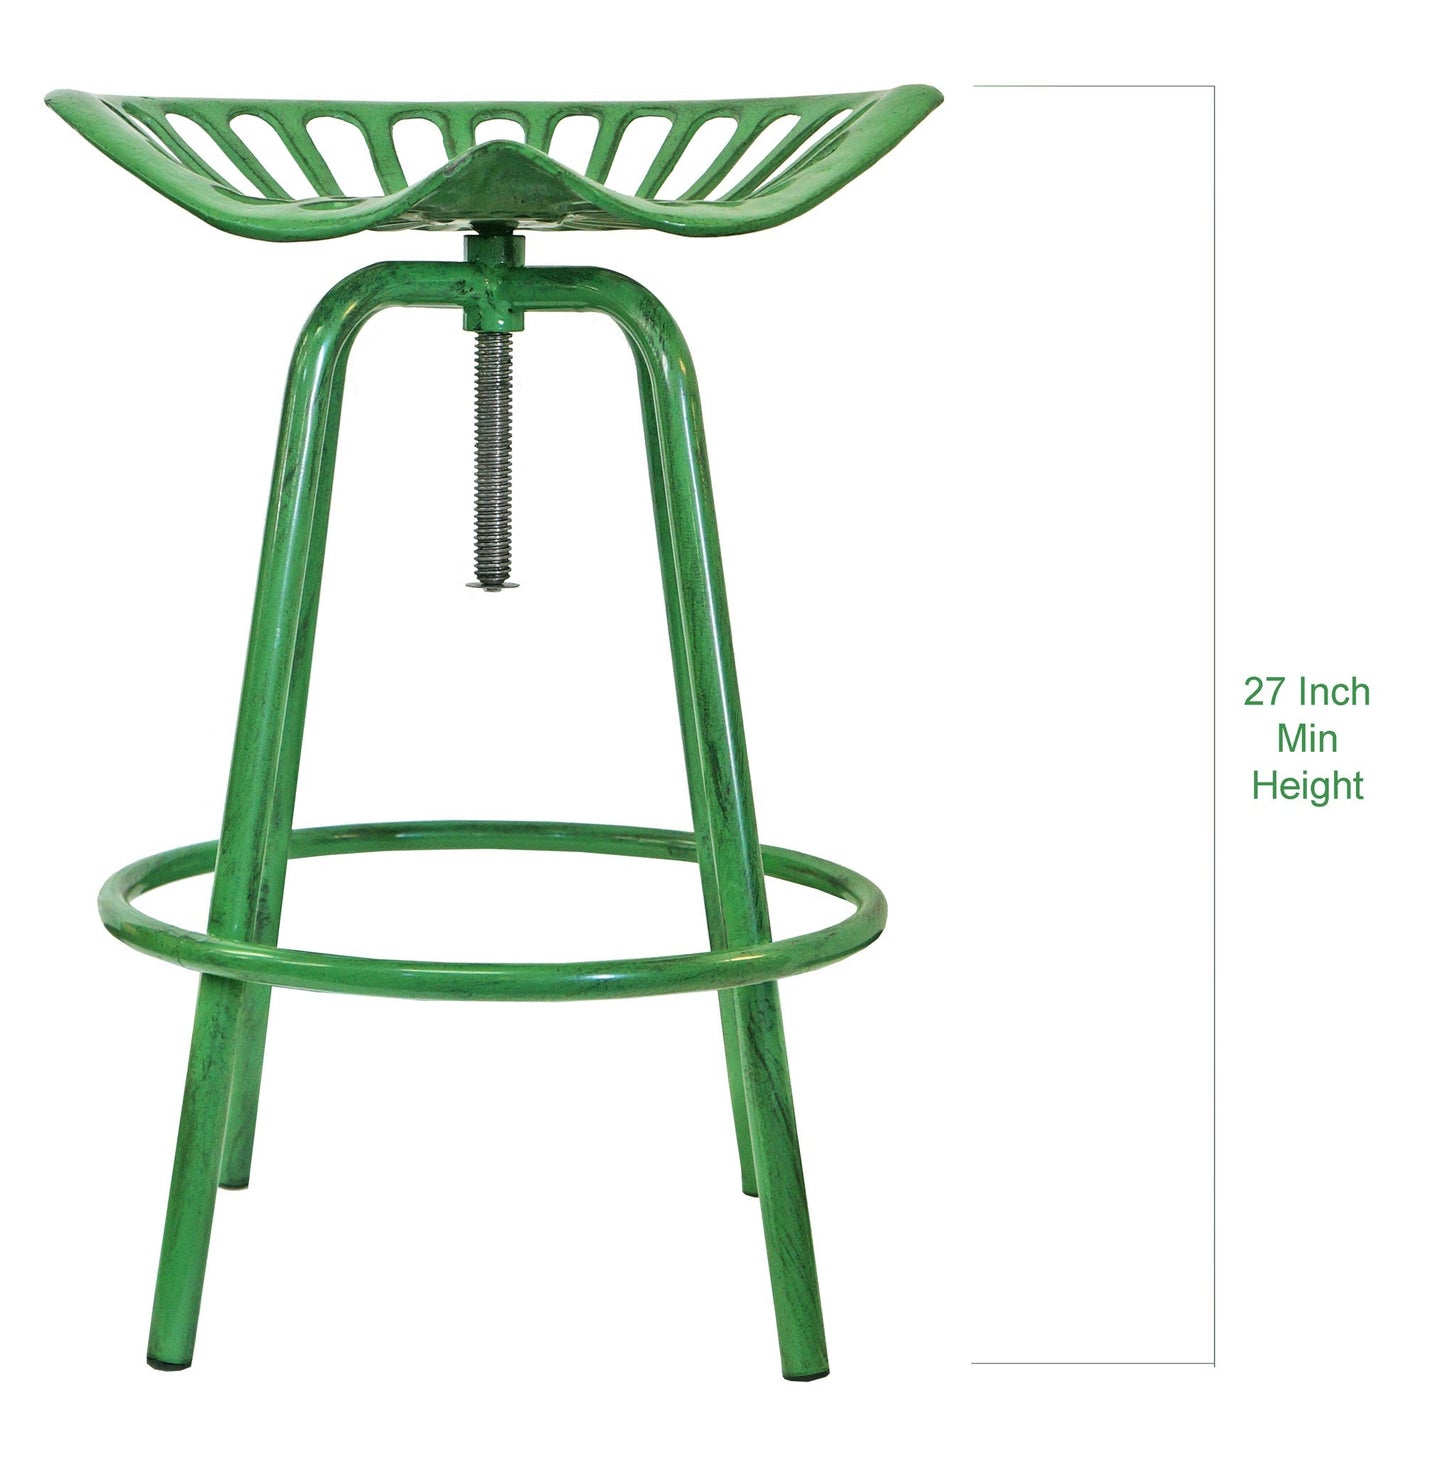 Tractor chair green, 50% Off